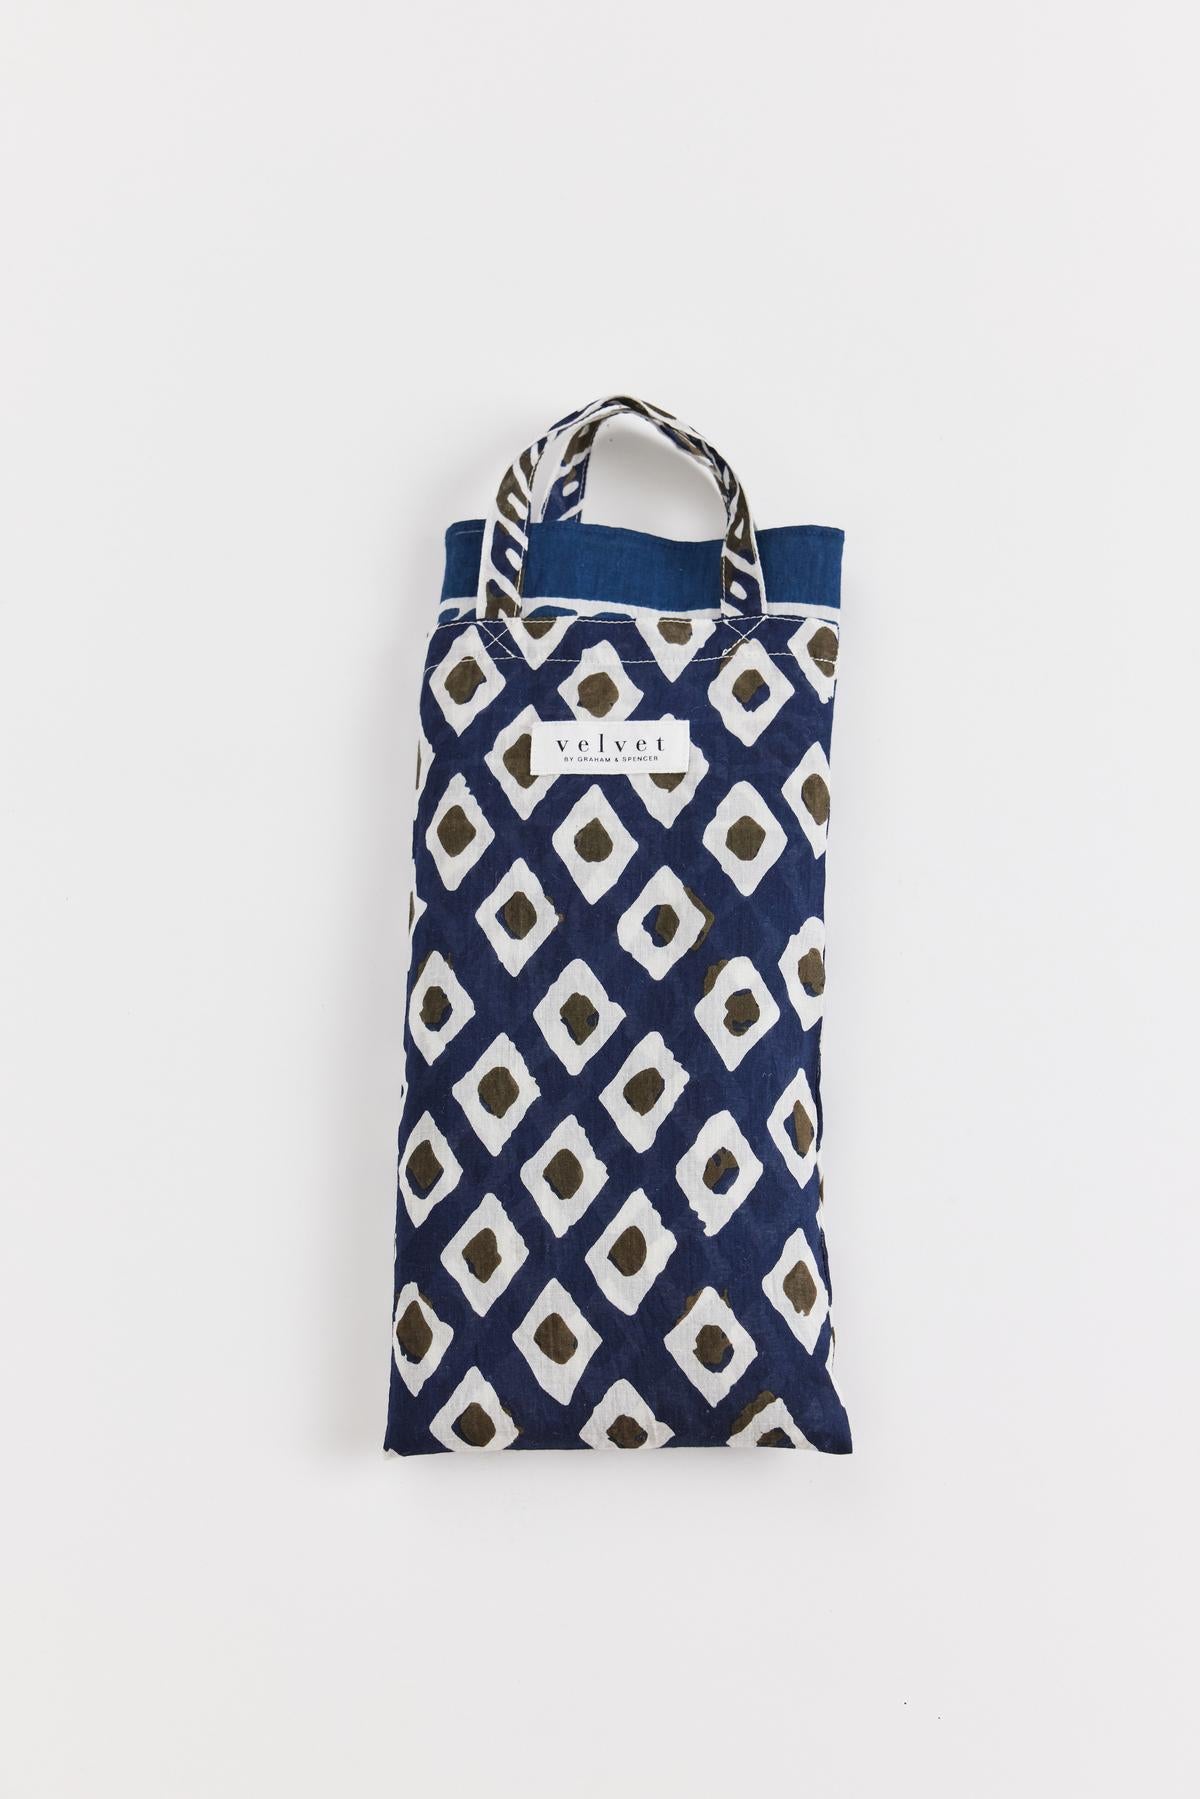 A SARONG WRAP with a blue and white geometric pattern and the word "Velvet by Graham & Spencer" on a label, against a plain white background.-36752950460609